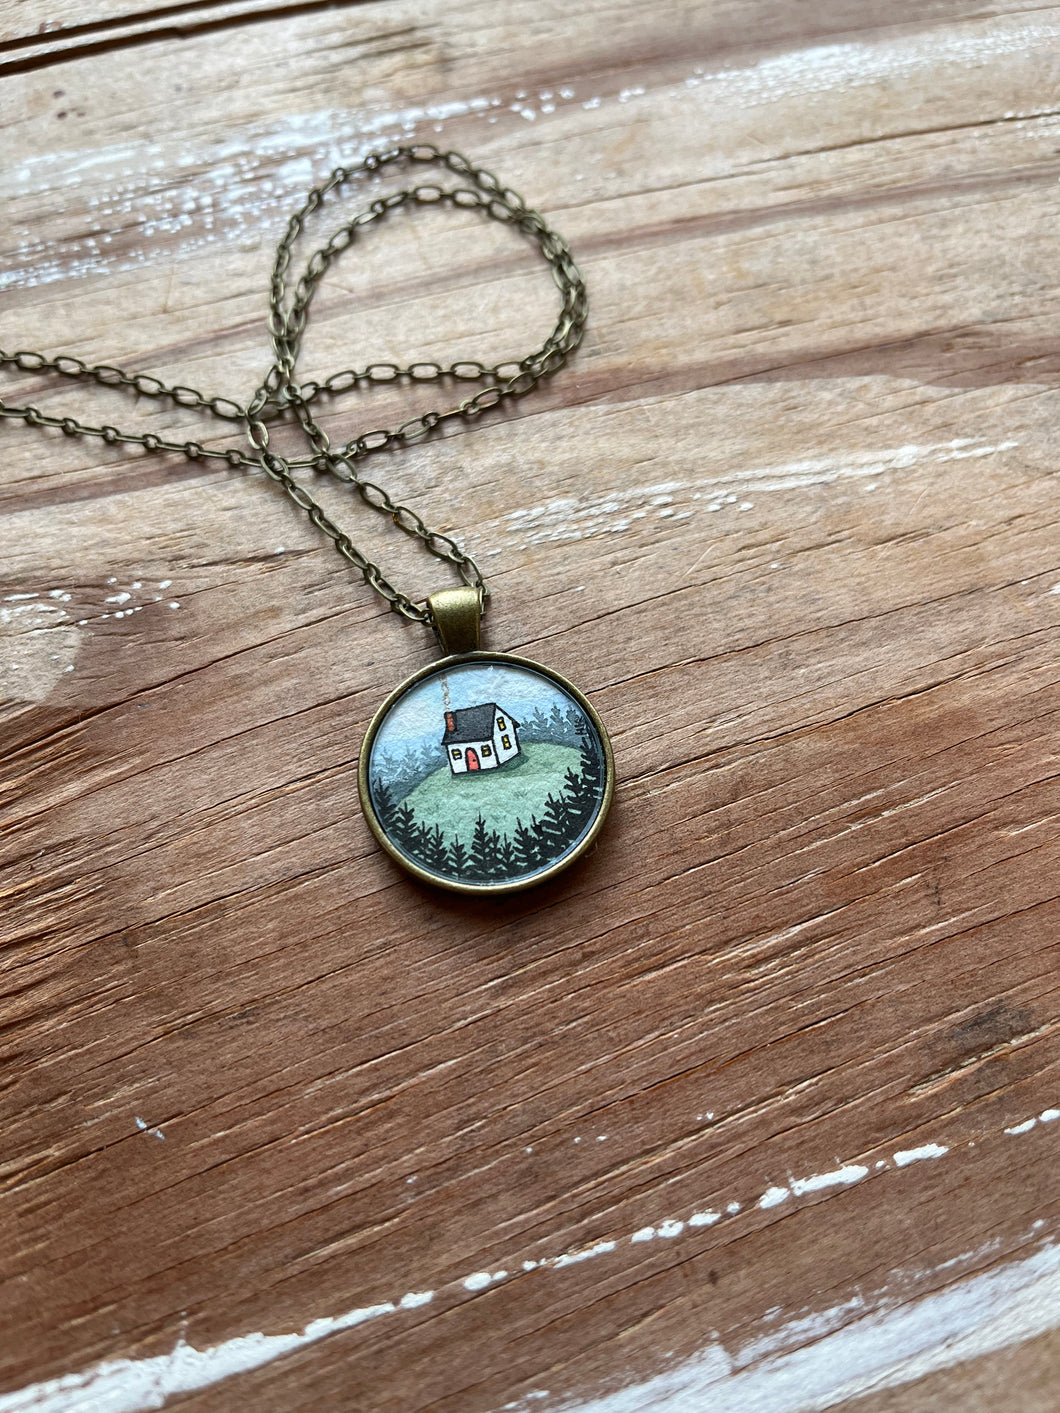 Tiny House on a Hill, Watercolor Landscape Hand Painted Necklace, Original Art Pendant